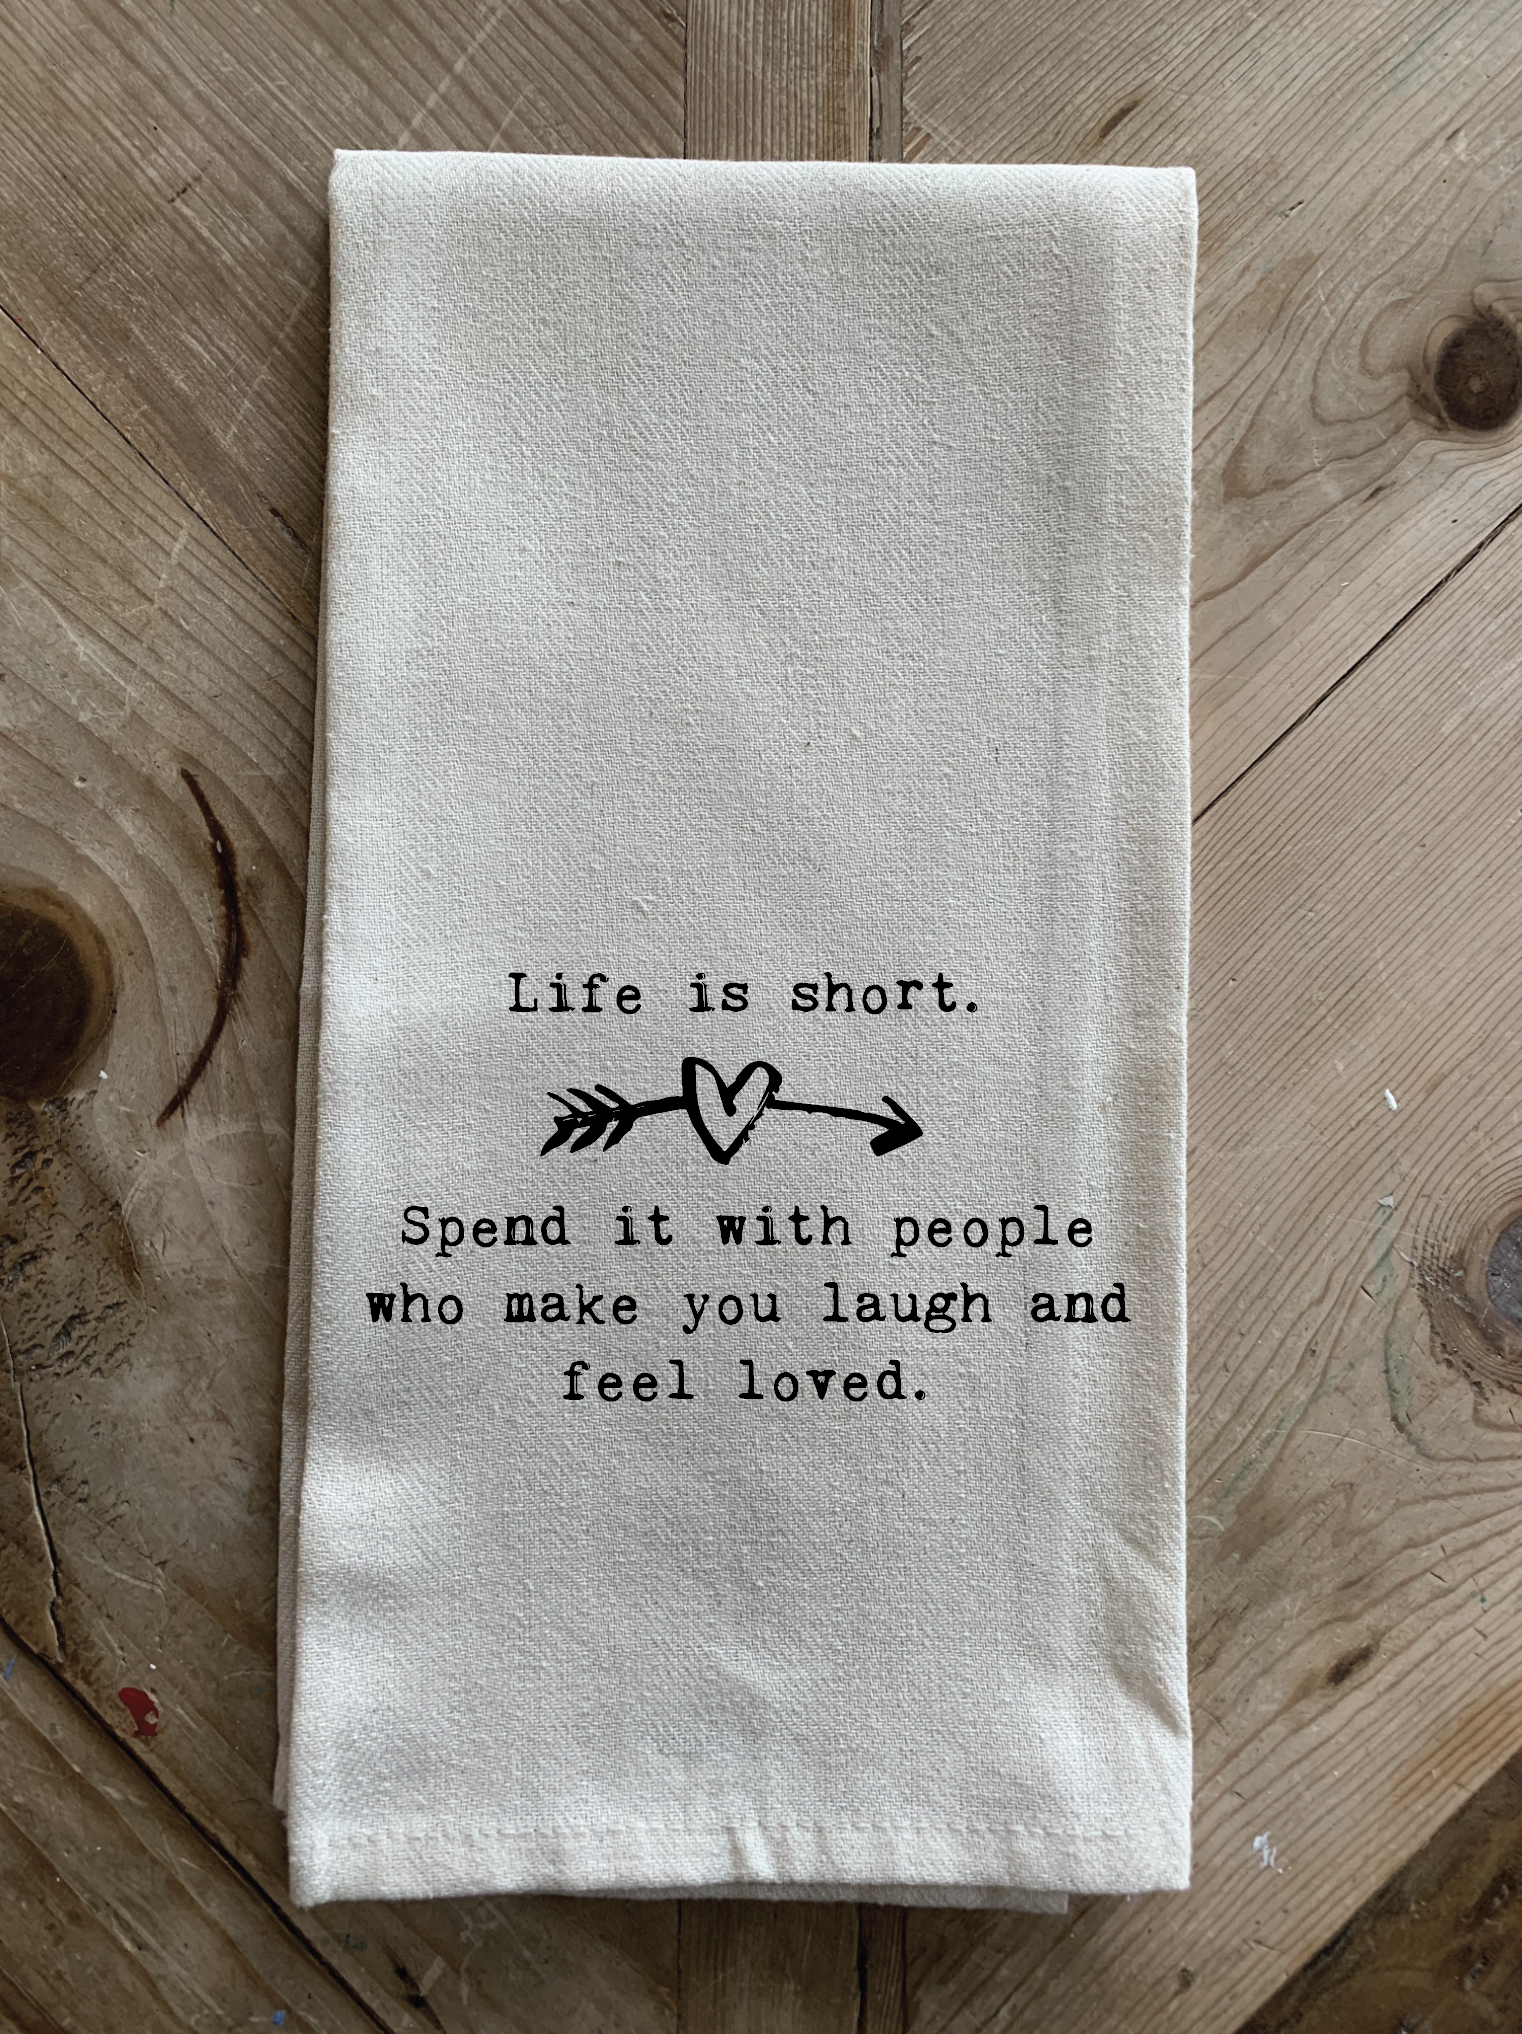 Life is short. Spend it with people who make you laugh and feel loved.